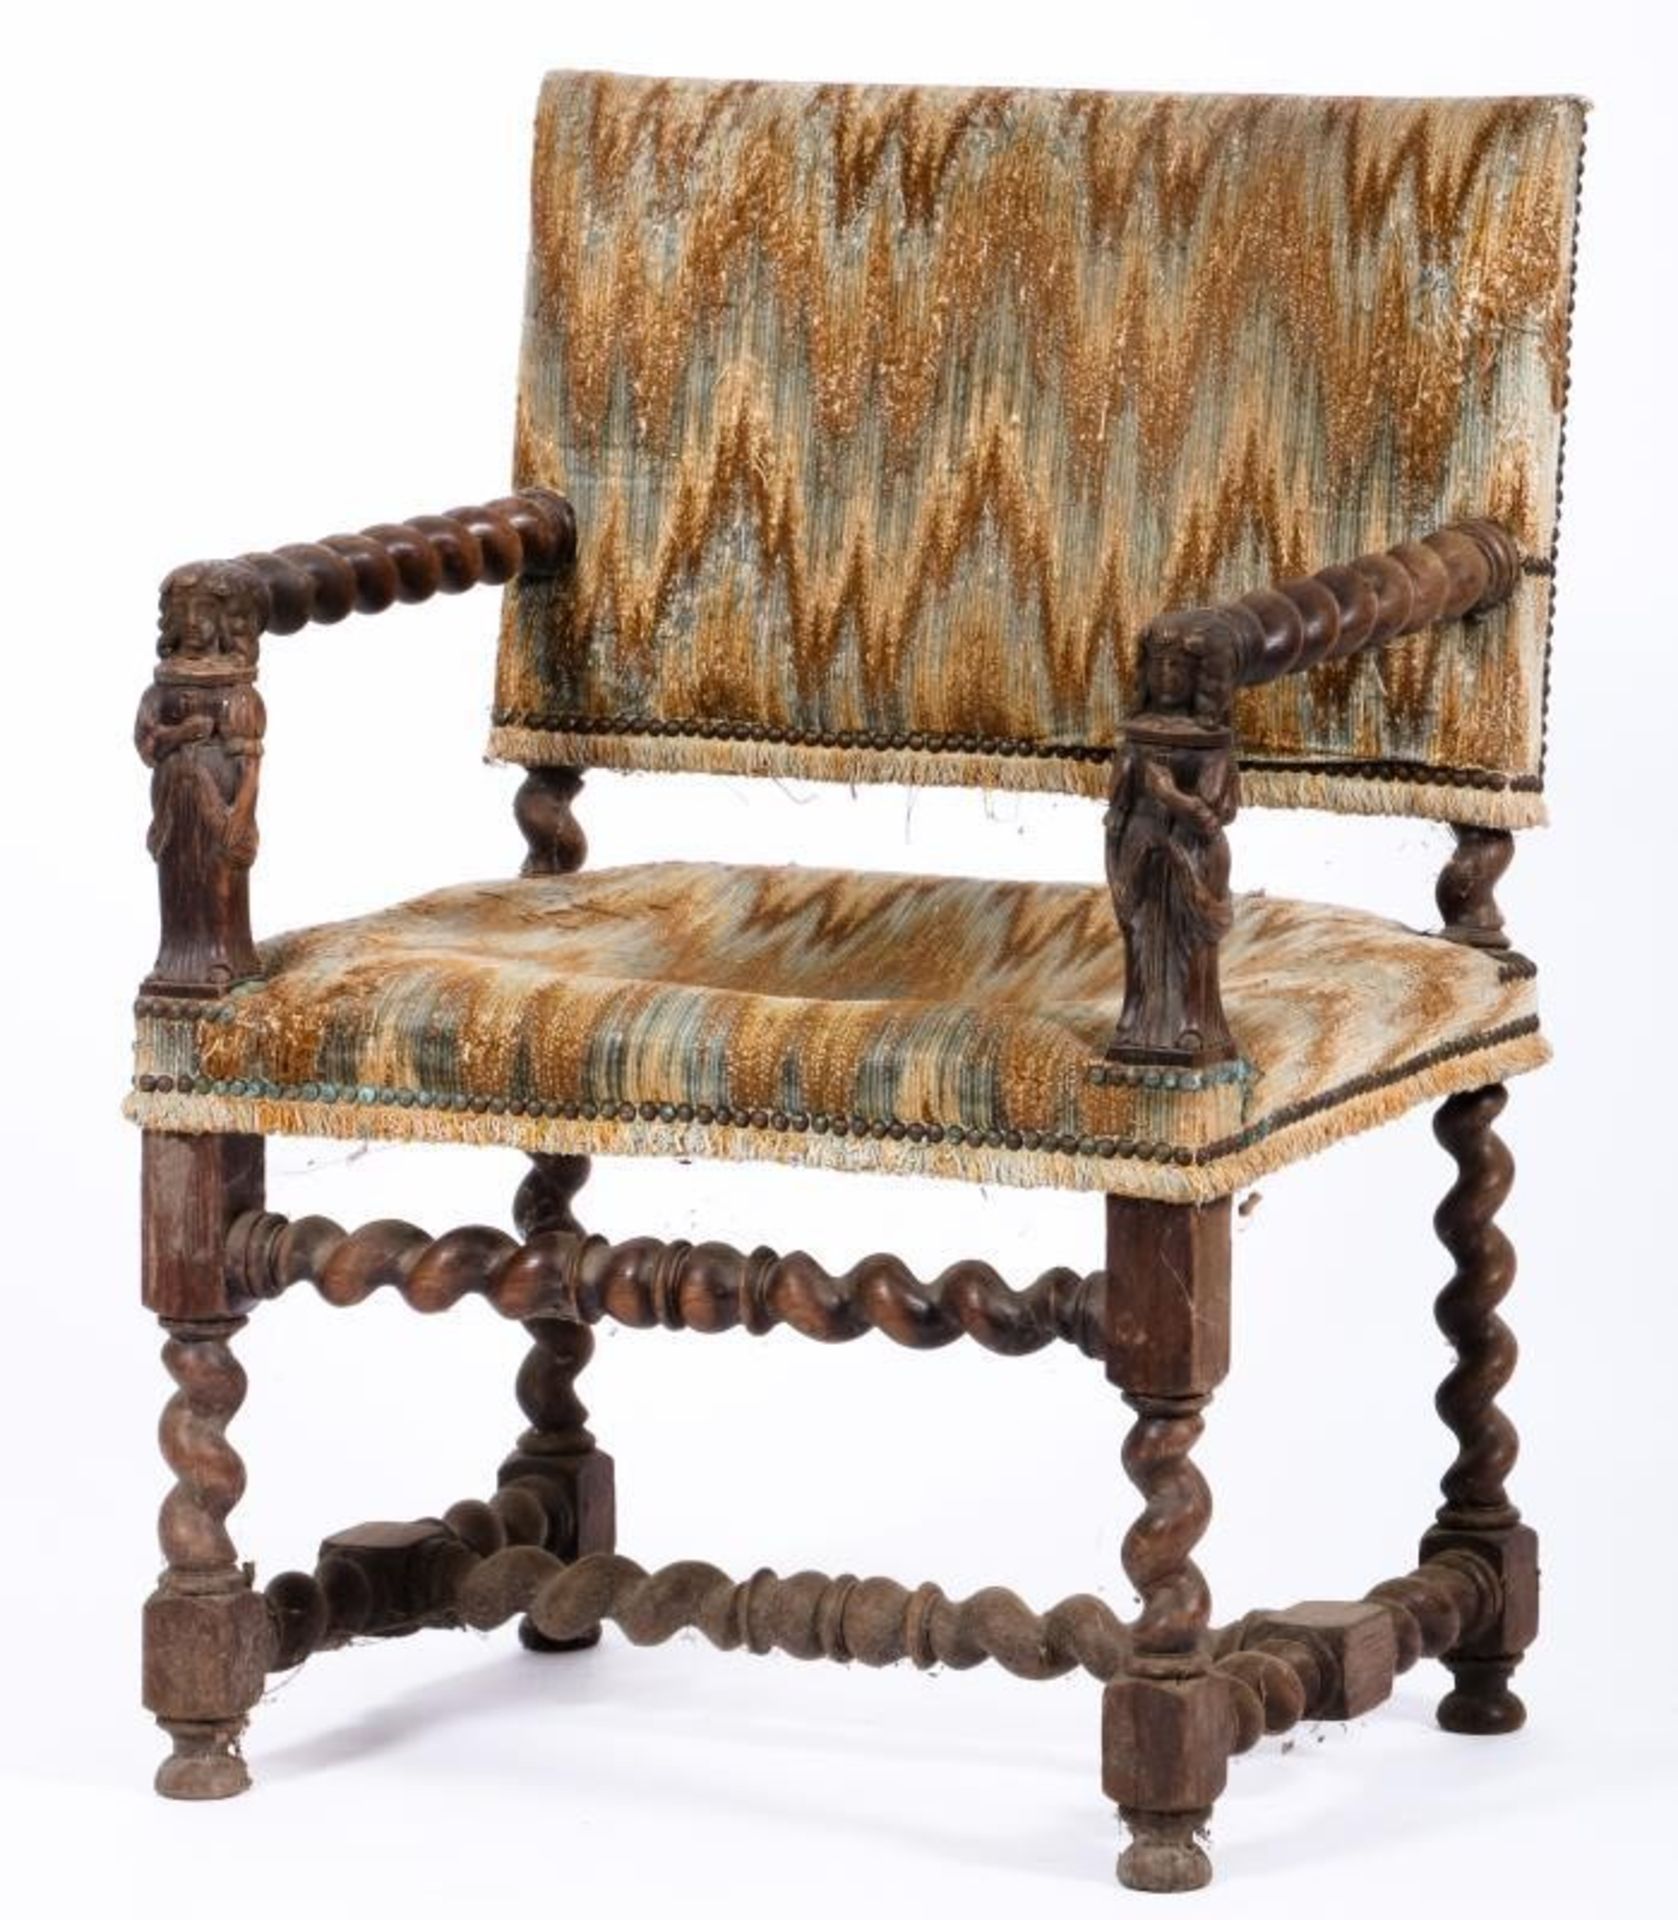 A nutwood armchair in 17th century style, The Netherlands, ca. 1900.